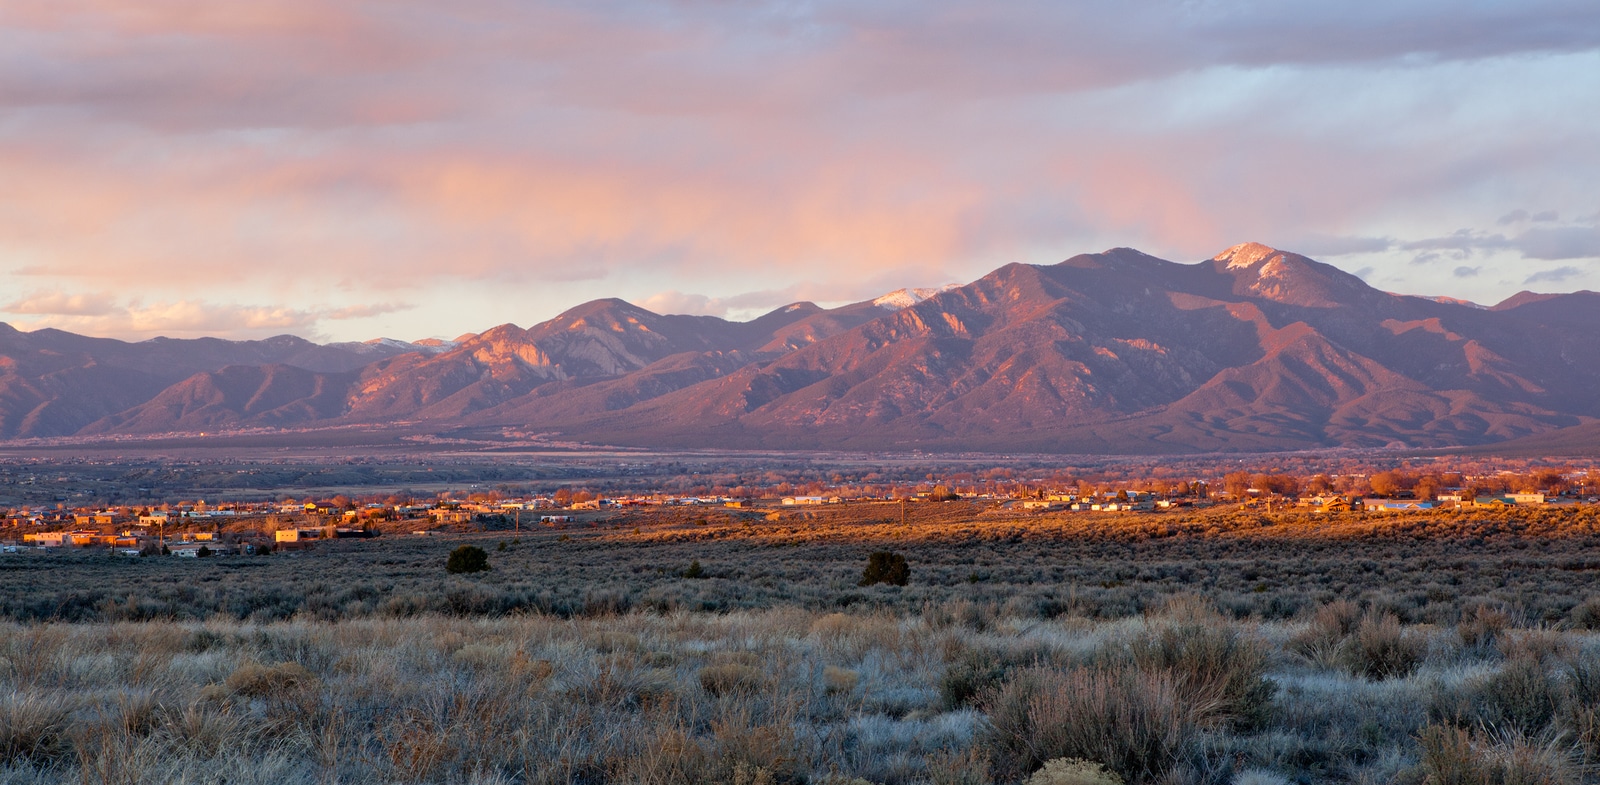 The Best Things to do in Taos NM